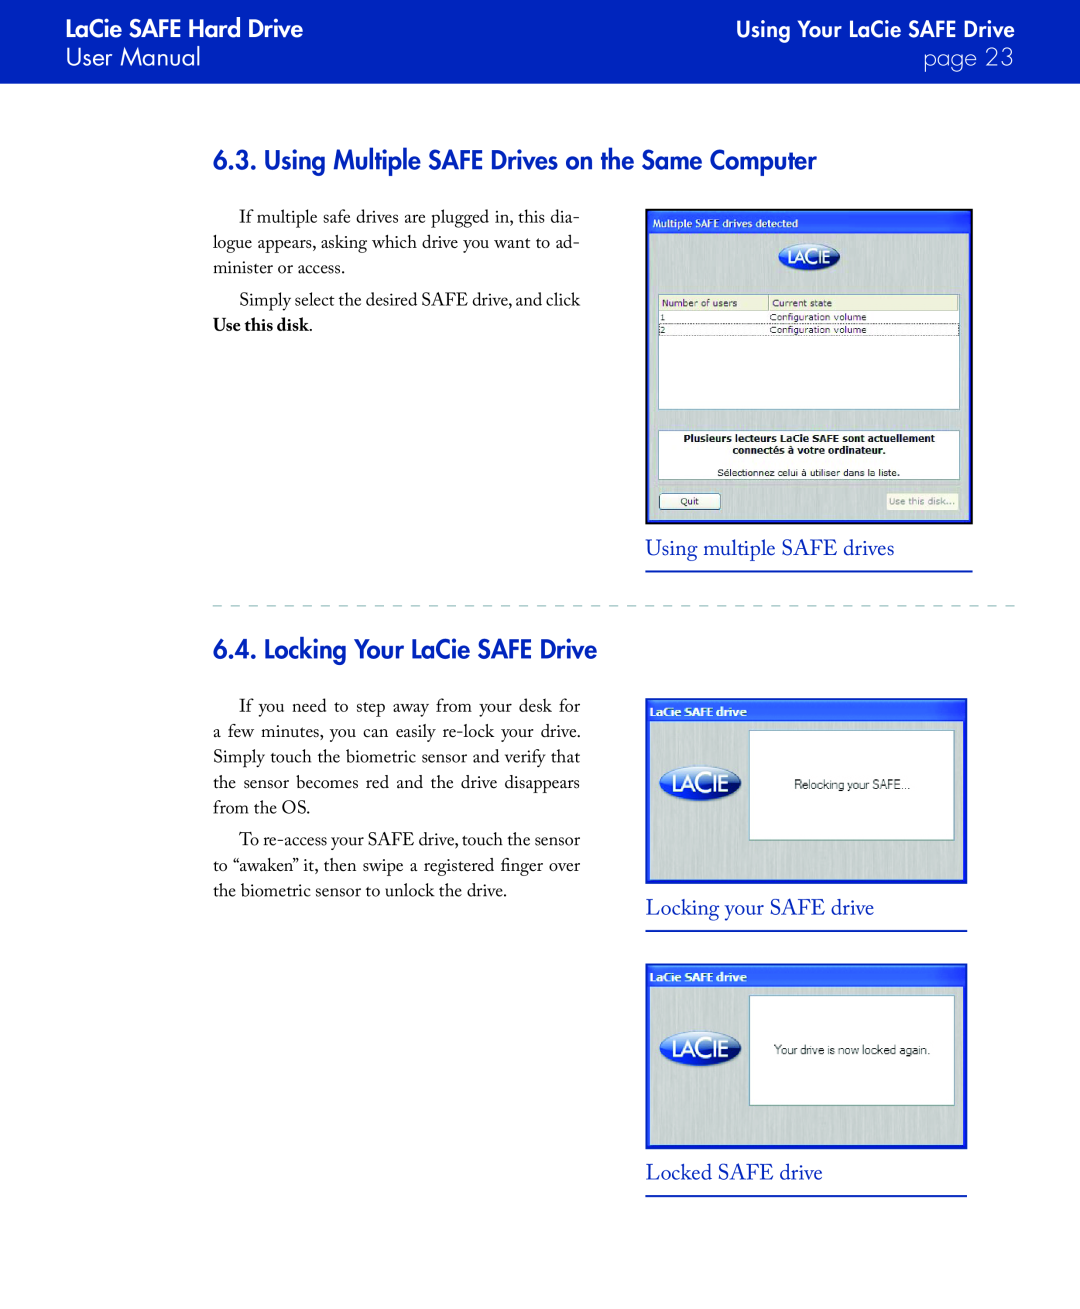 LaCie Using Multiple SAFE Drives on the Same Computer, Locking Your LaCie SAFE Drive, Using multiple SAFE drives, page 